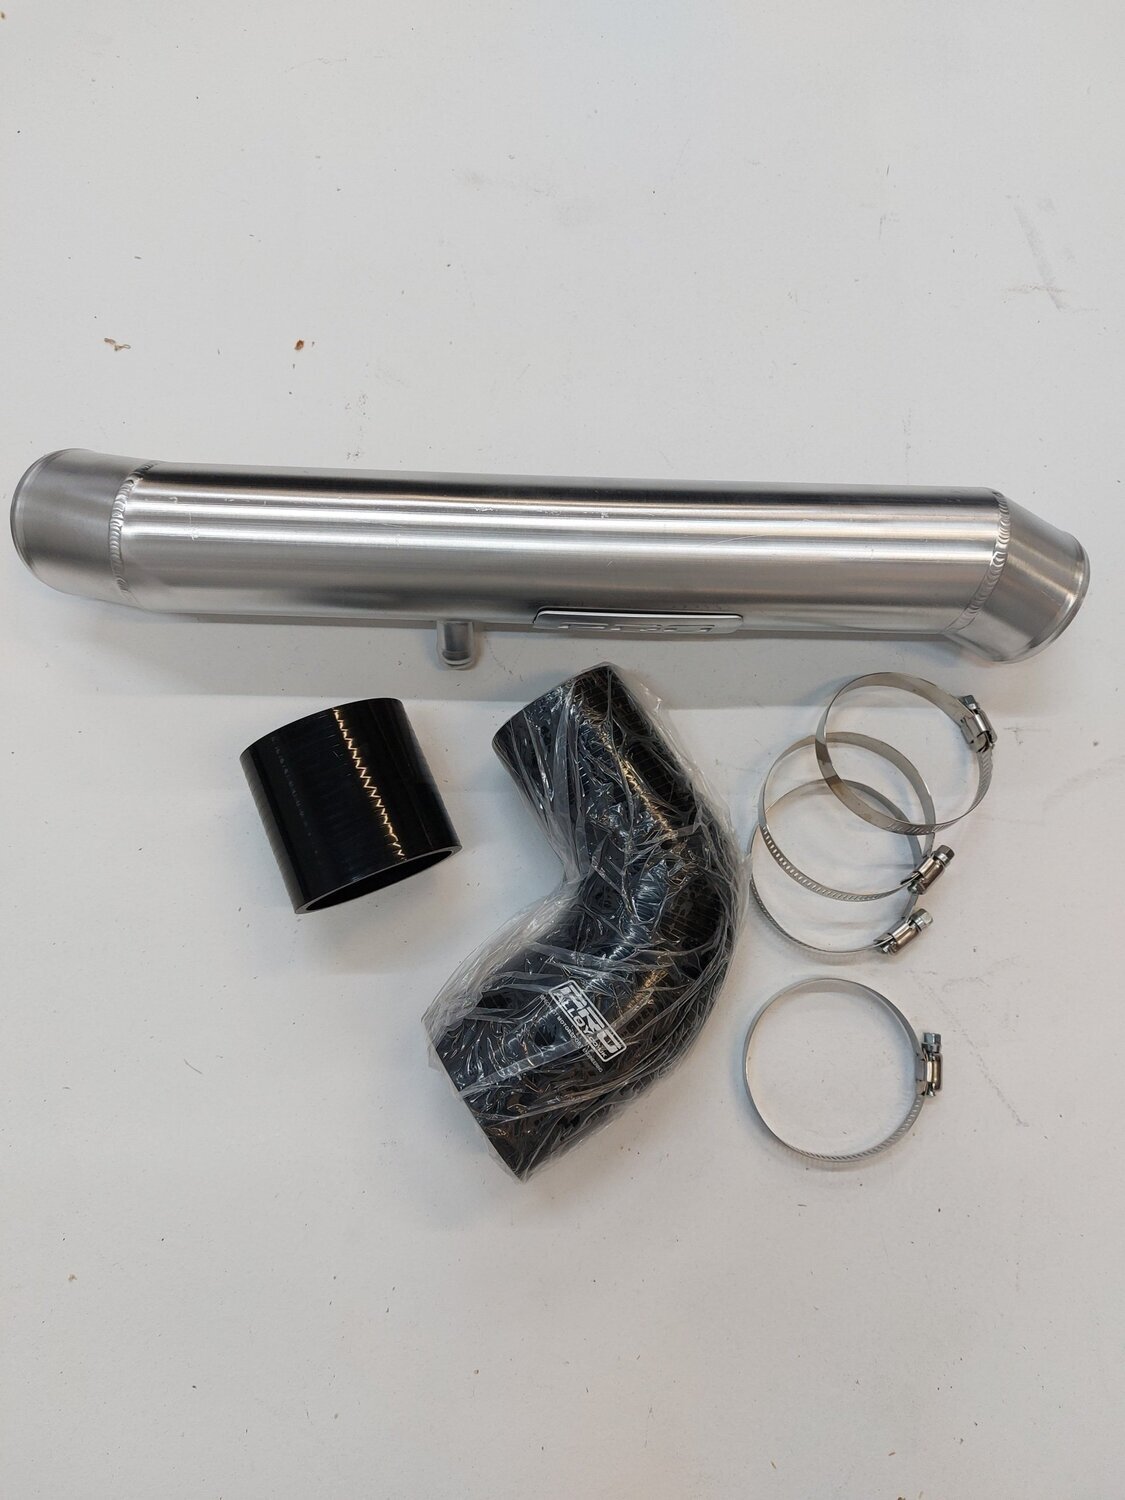 VX220 2.0T pro alloy intake pipe